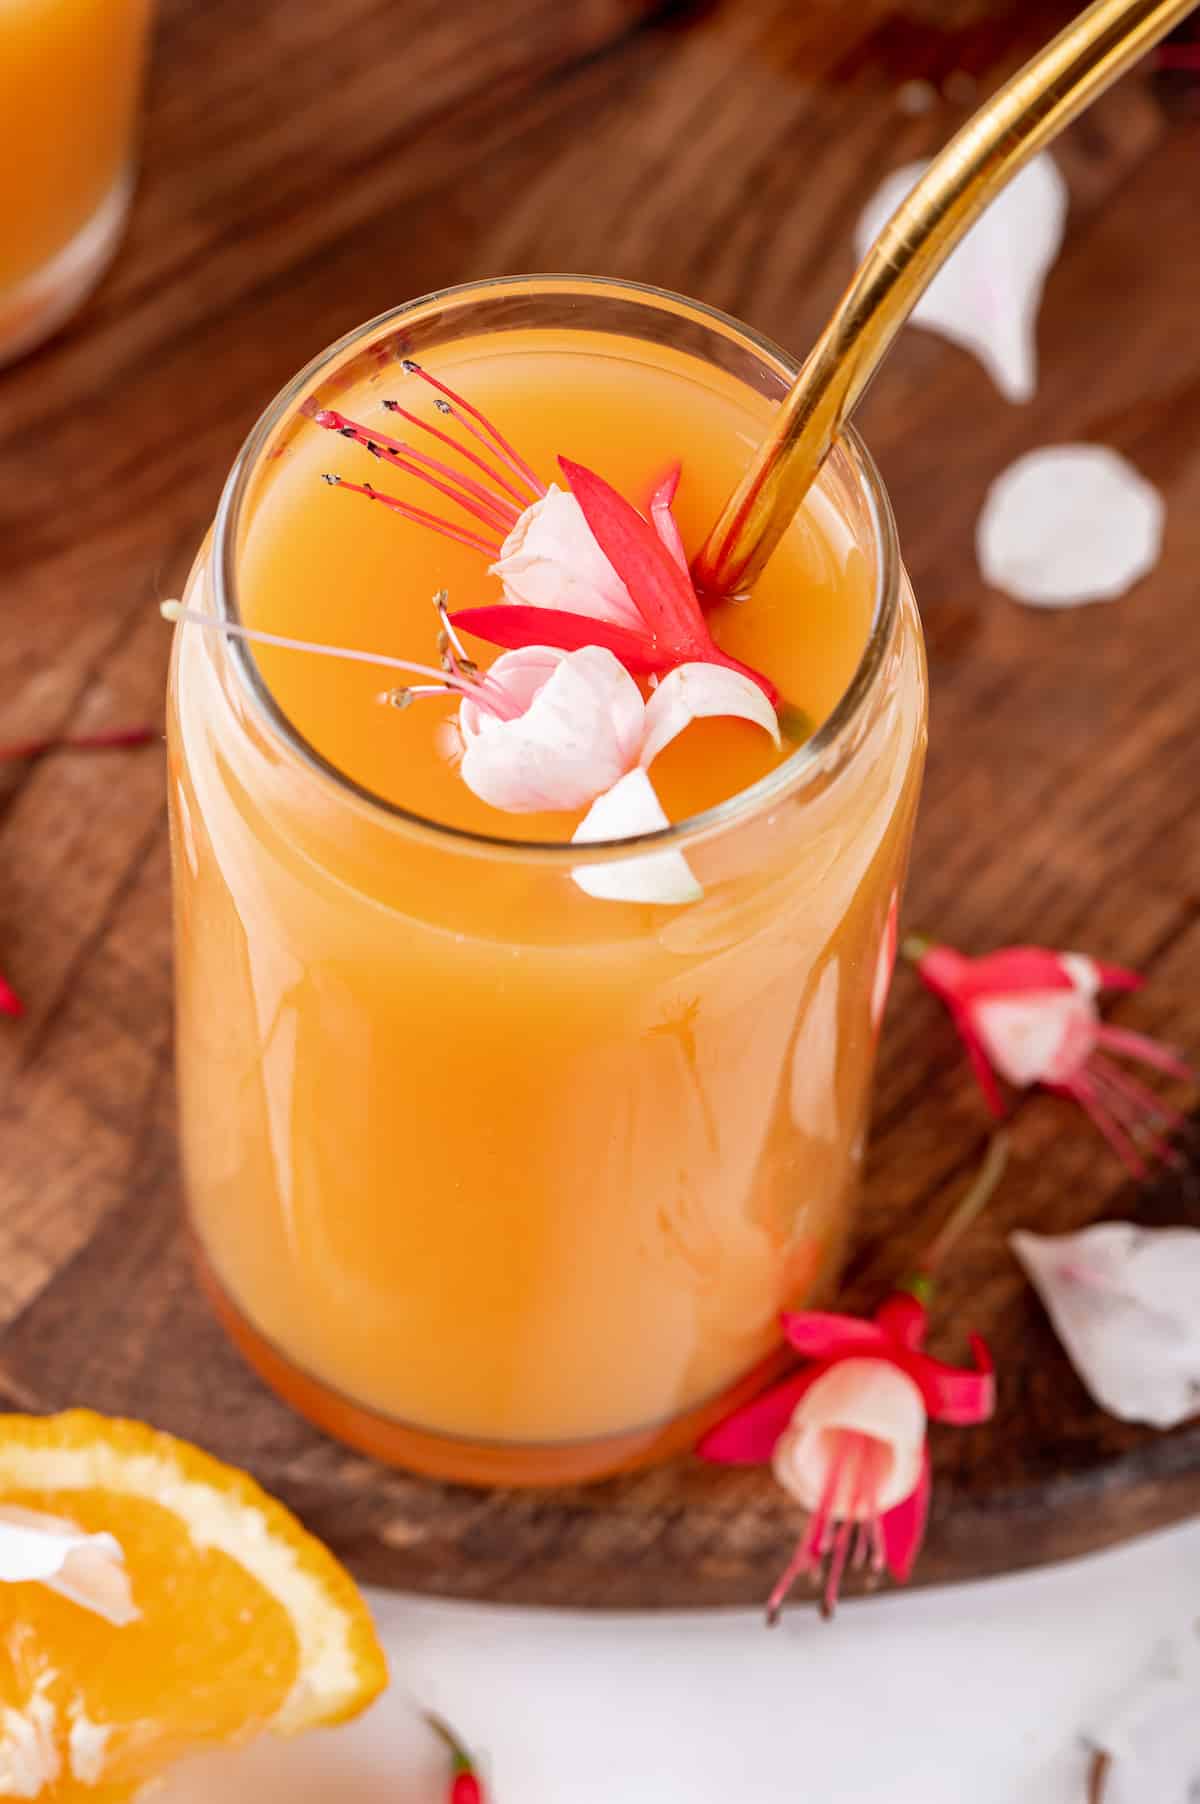 Glass of POG juice with gold straw and flower garnish